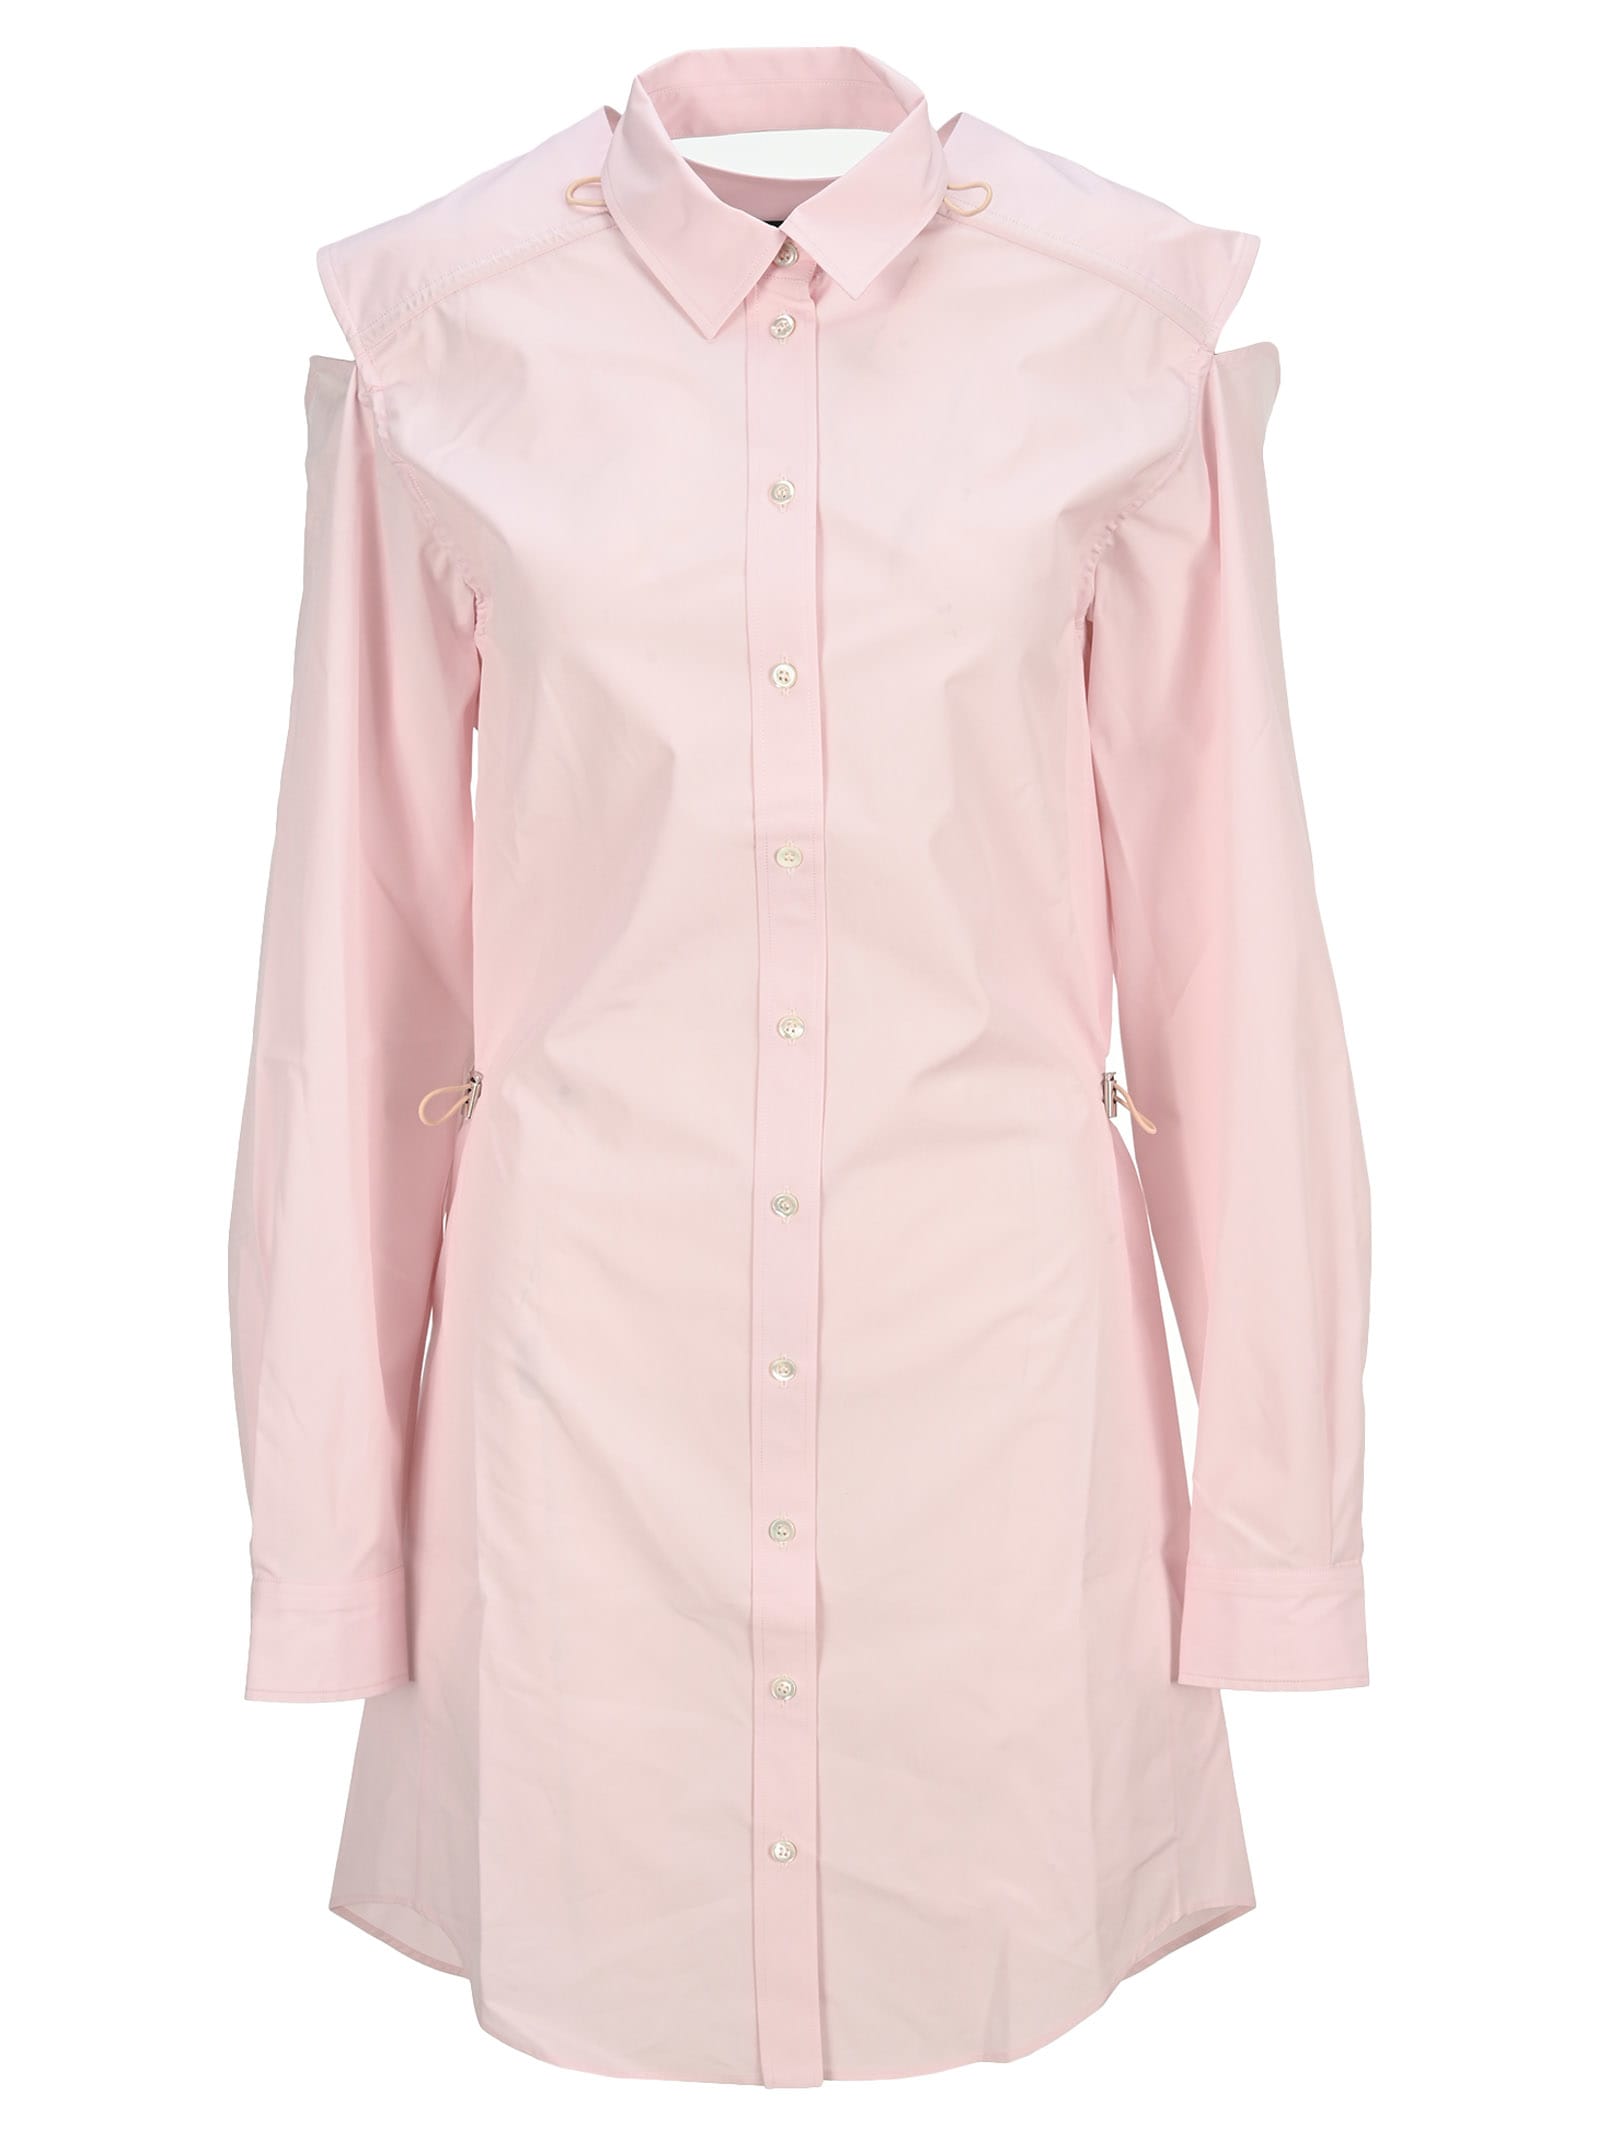 Y/PROJECT Y/PROJECT CONVERTIBLE SHIRT DRESS,WSHIRT54S20F140LIGHTPINK